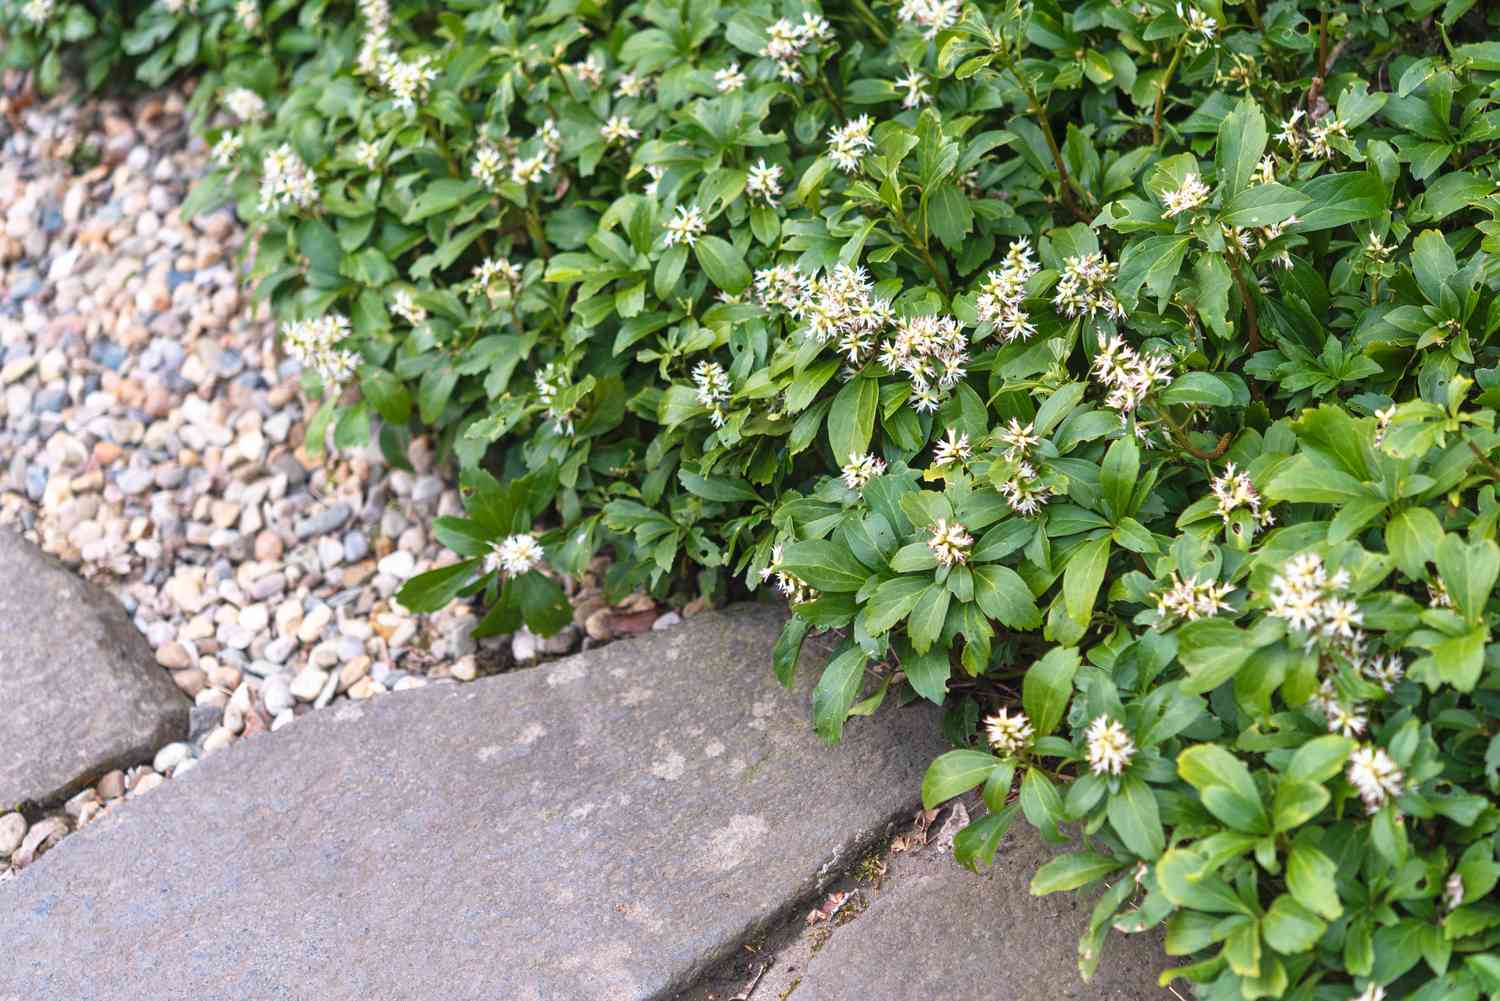 Pachysandra plant with small white flower clusters and leaves covering ground near stone edge